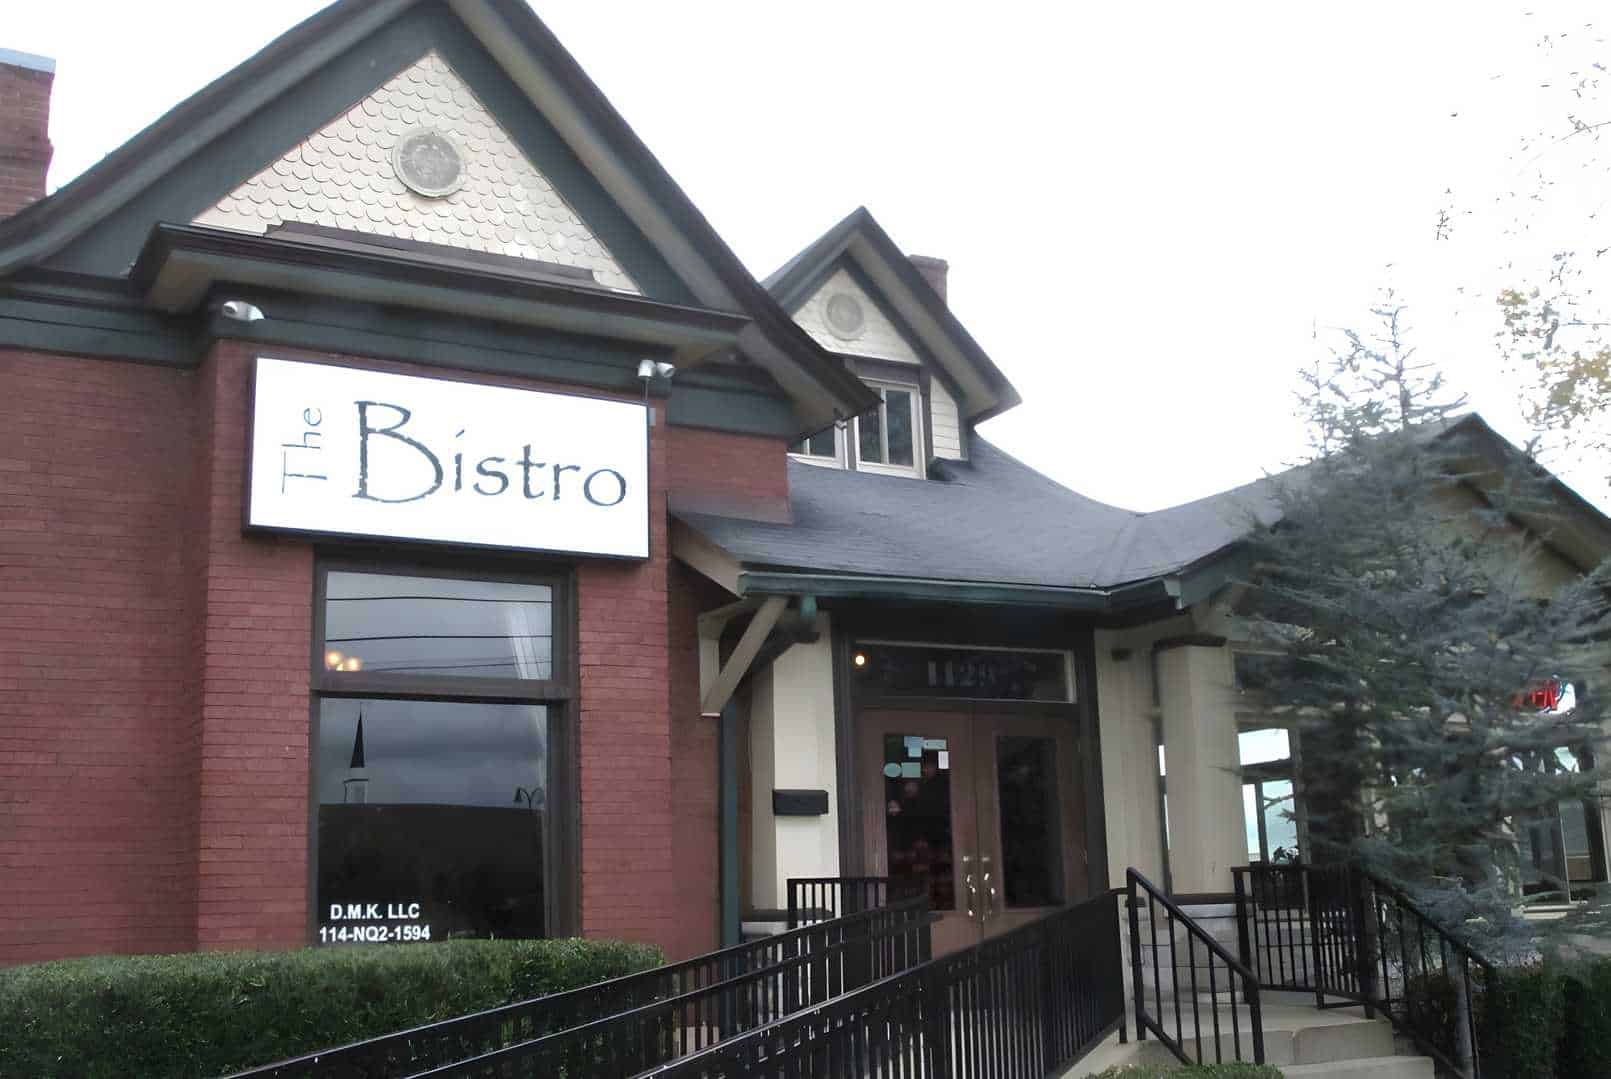 The Bistro Best Restaurants in Bowling Green, KY